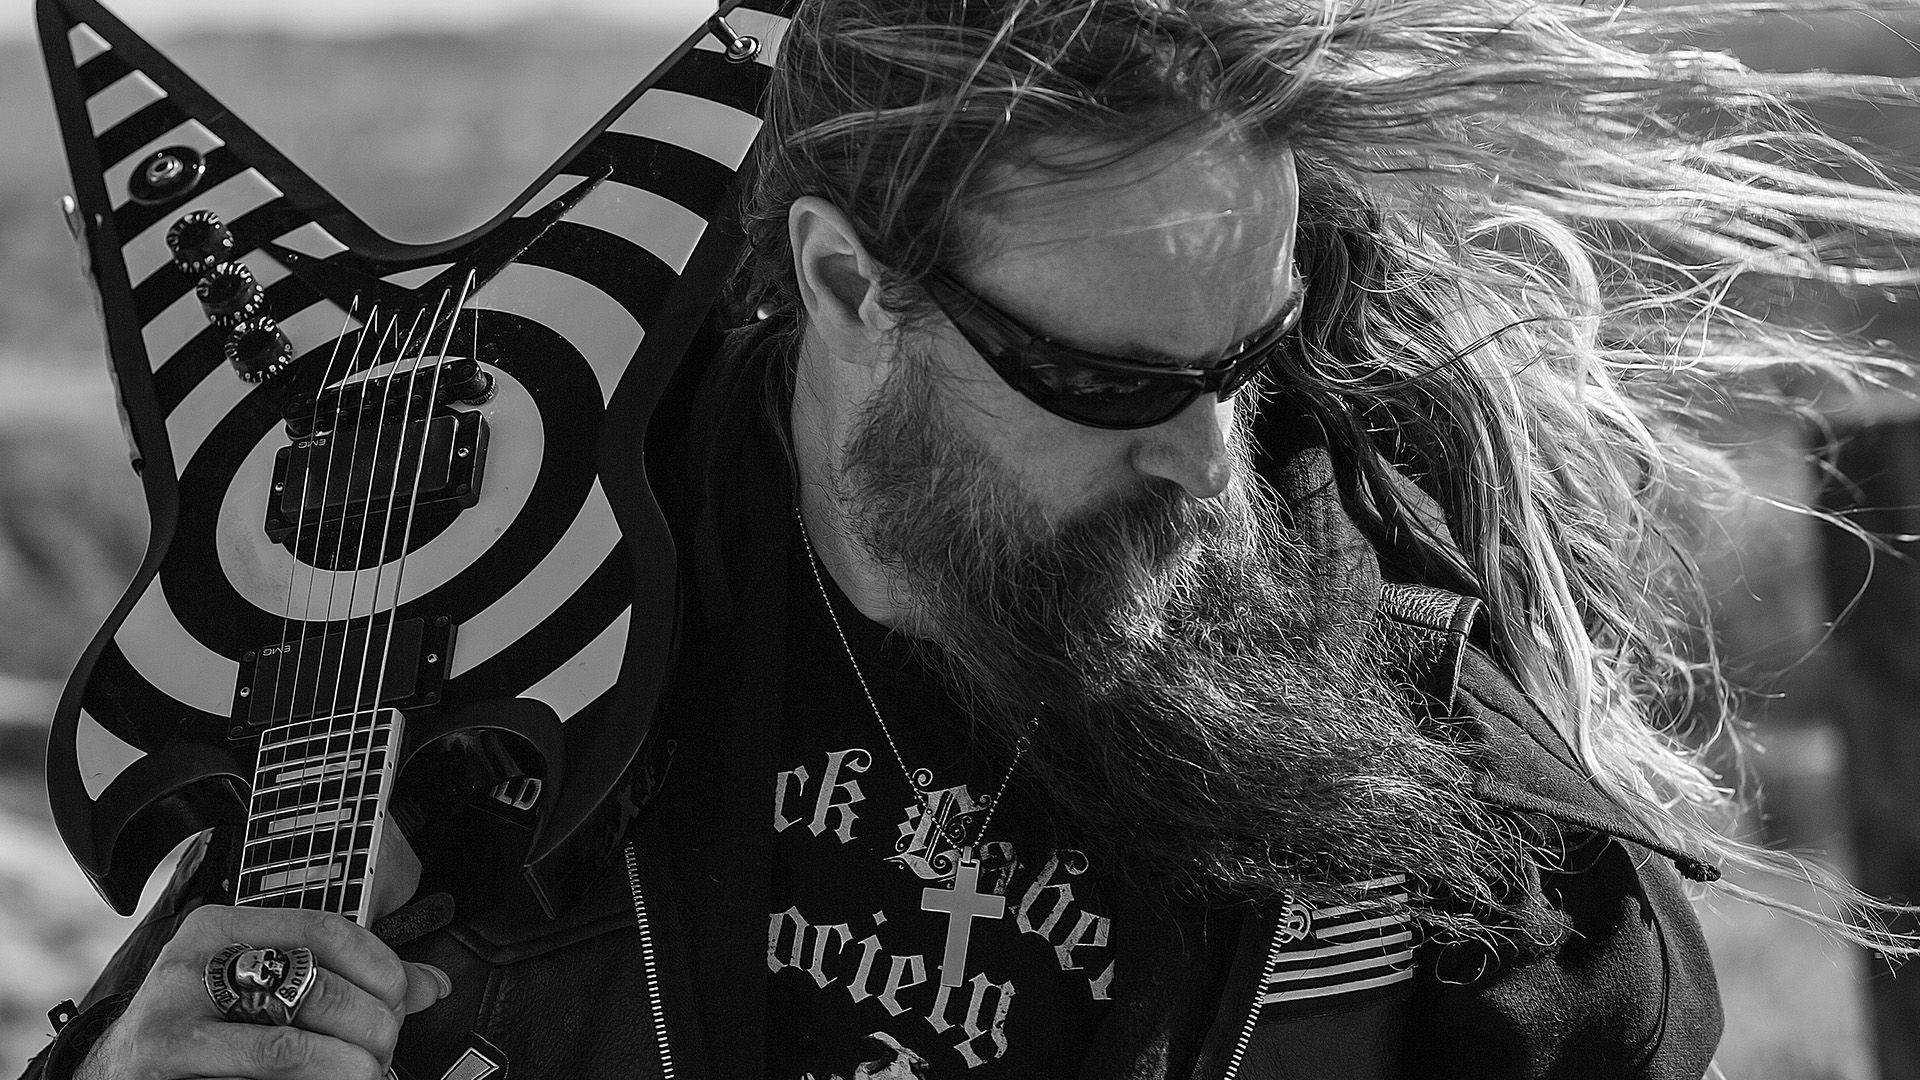 Black Label Society Wallpapers - Top Free Black Label Society